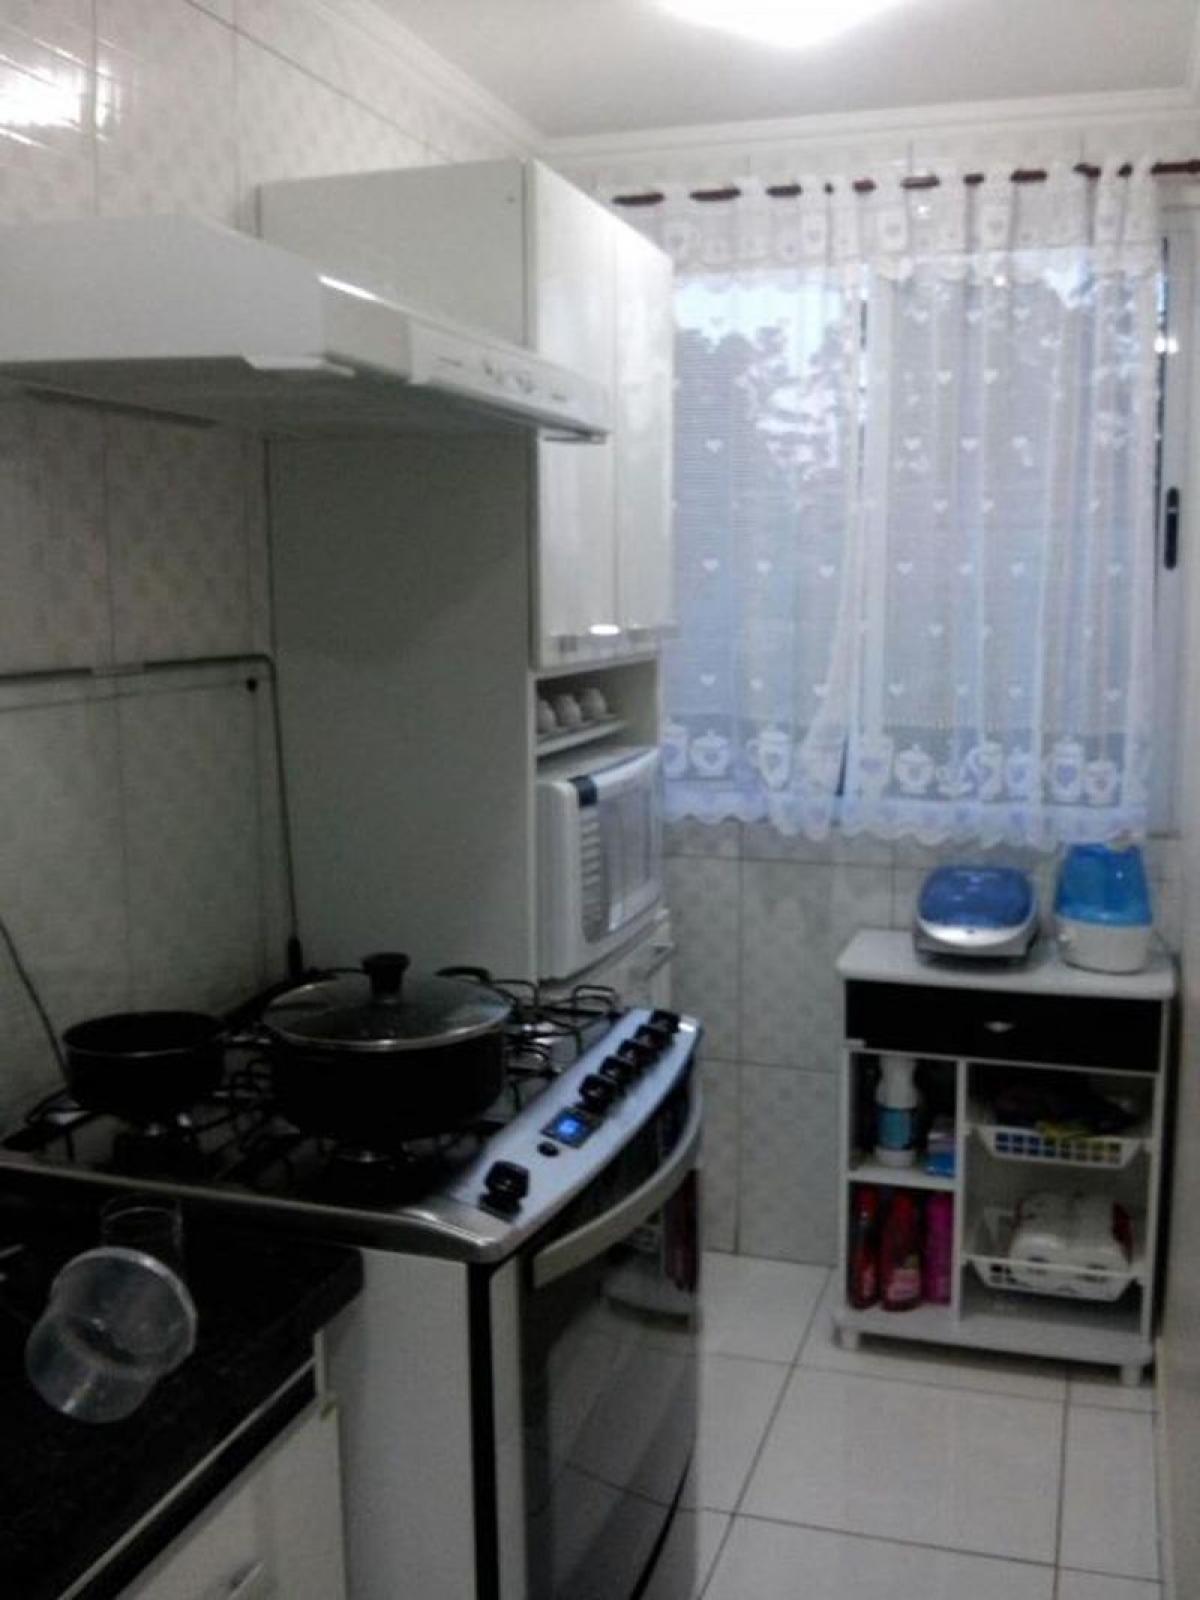 Picture of Apartment For Sale in Guarulhos, Sao Paulo, Brazil